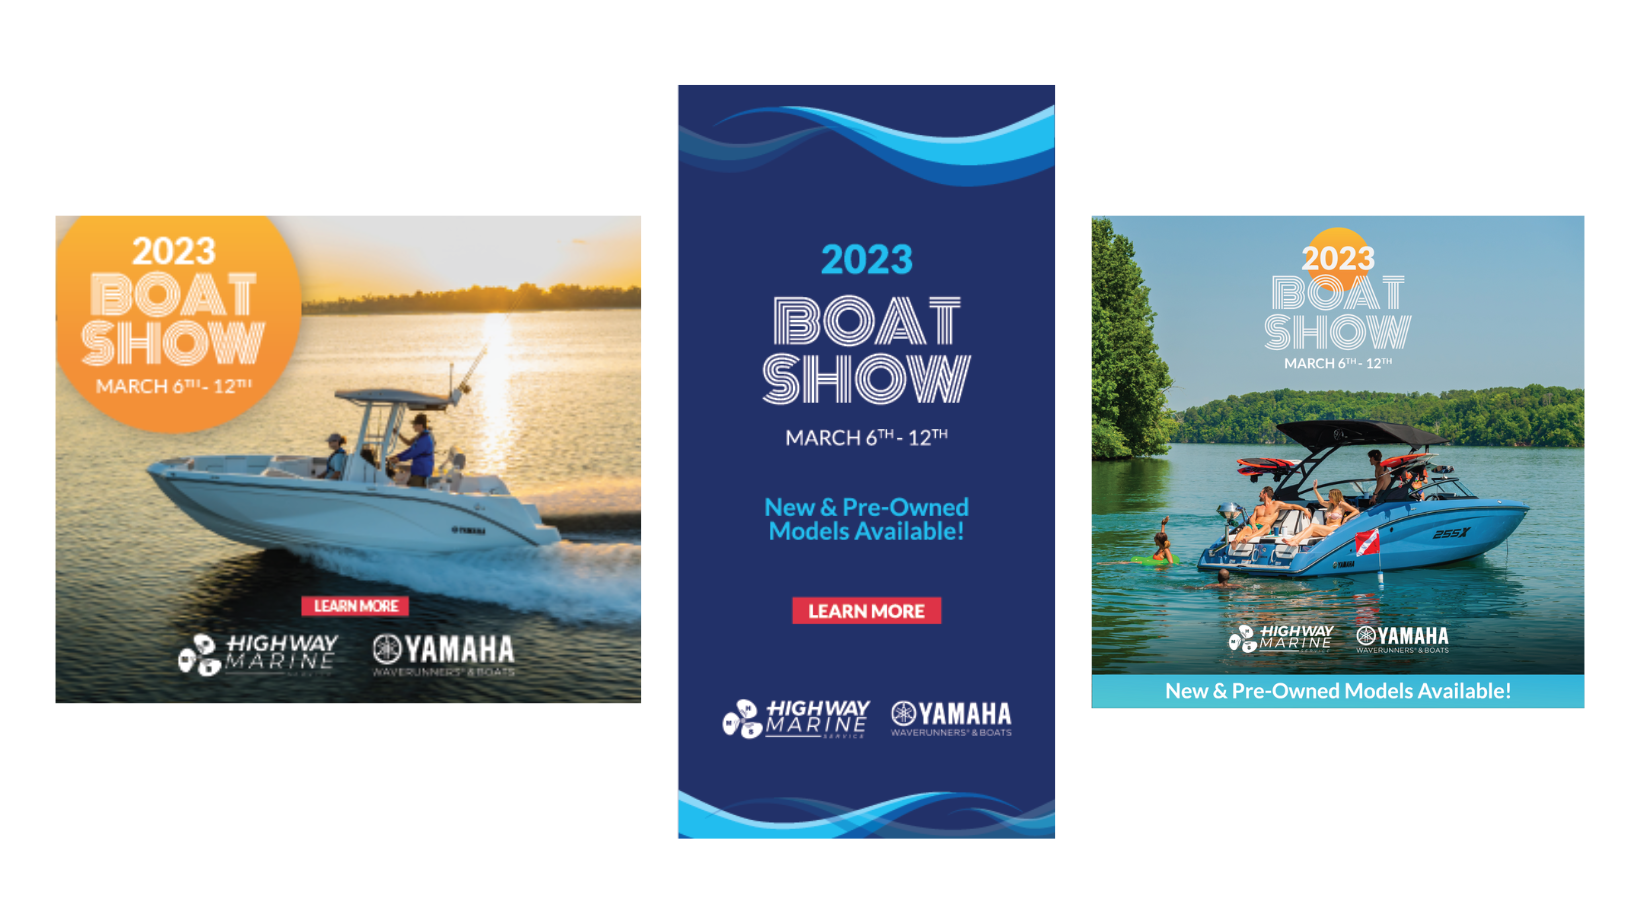 Examples of ad images and social images from the 2023 boat show.